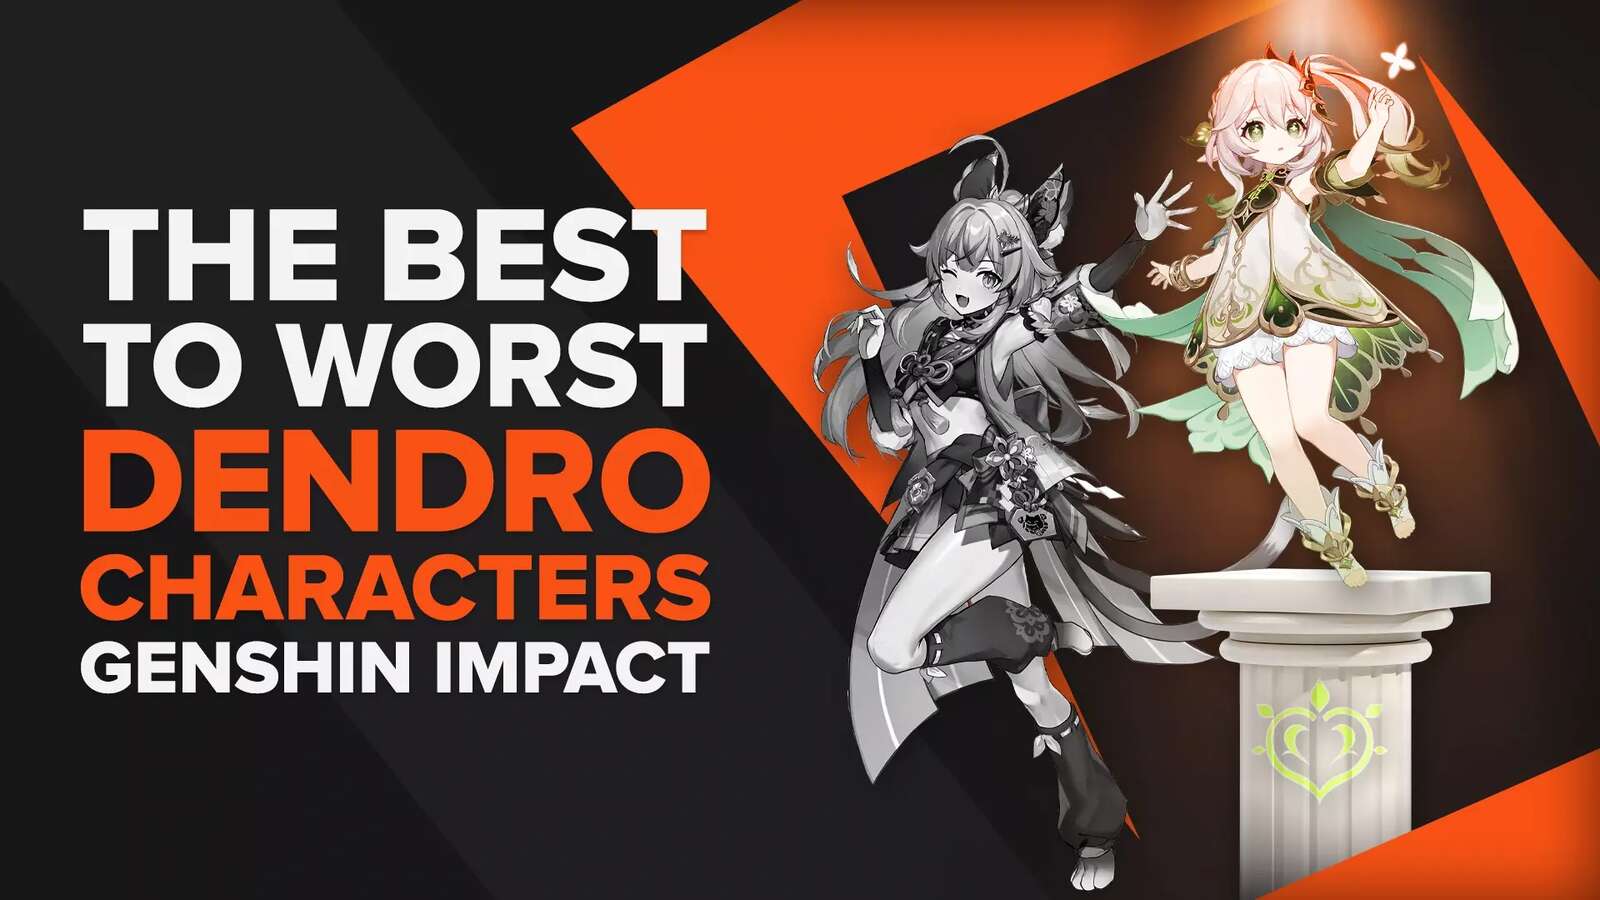 All Playable Dendro Characters Ranked [#1 Will Shock You!]